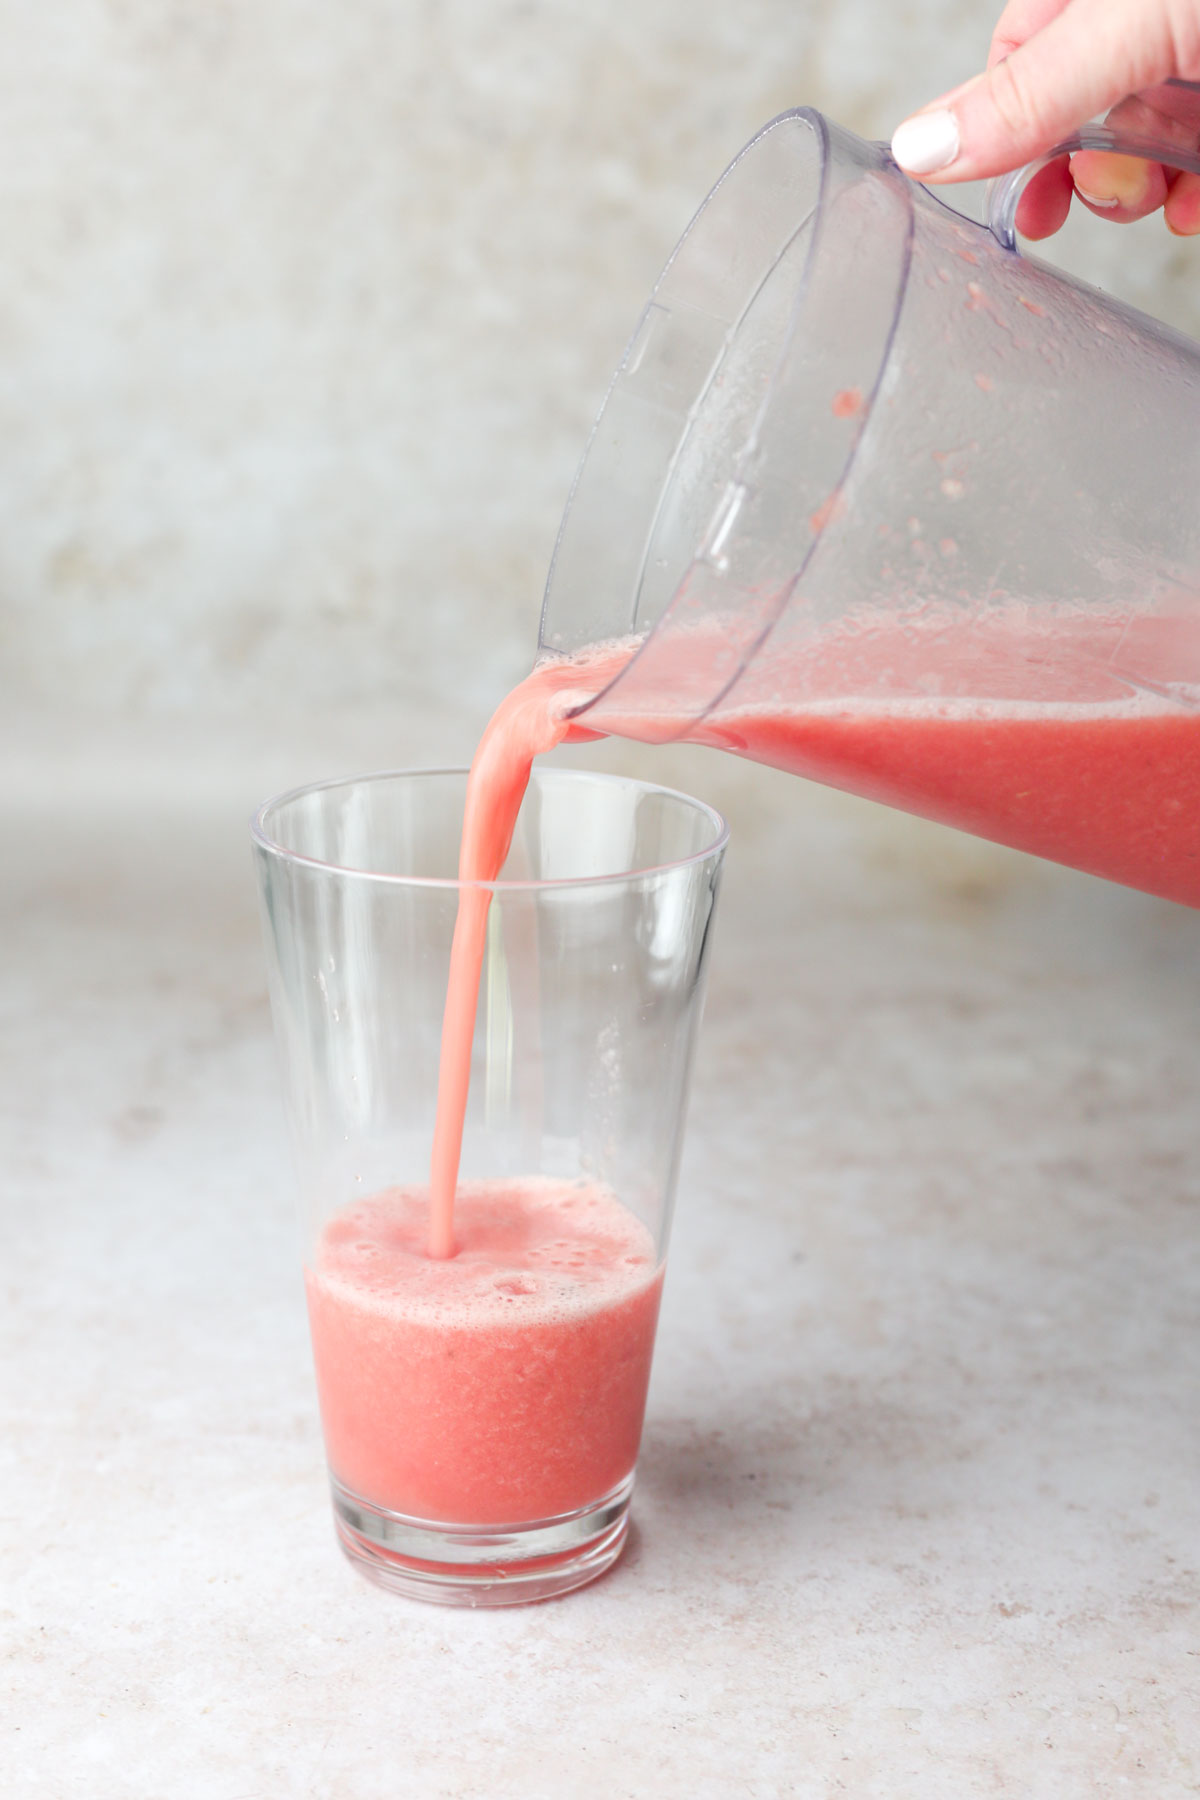 pouring the smoothie into a separate glass for serving.